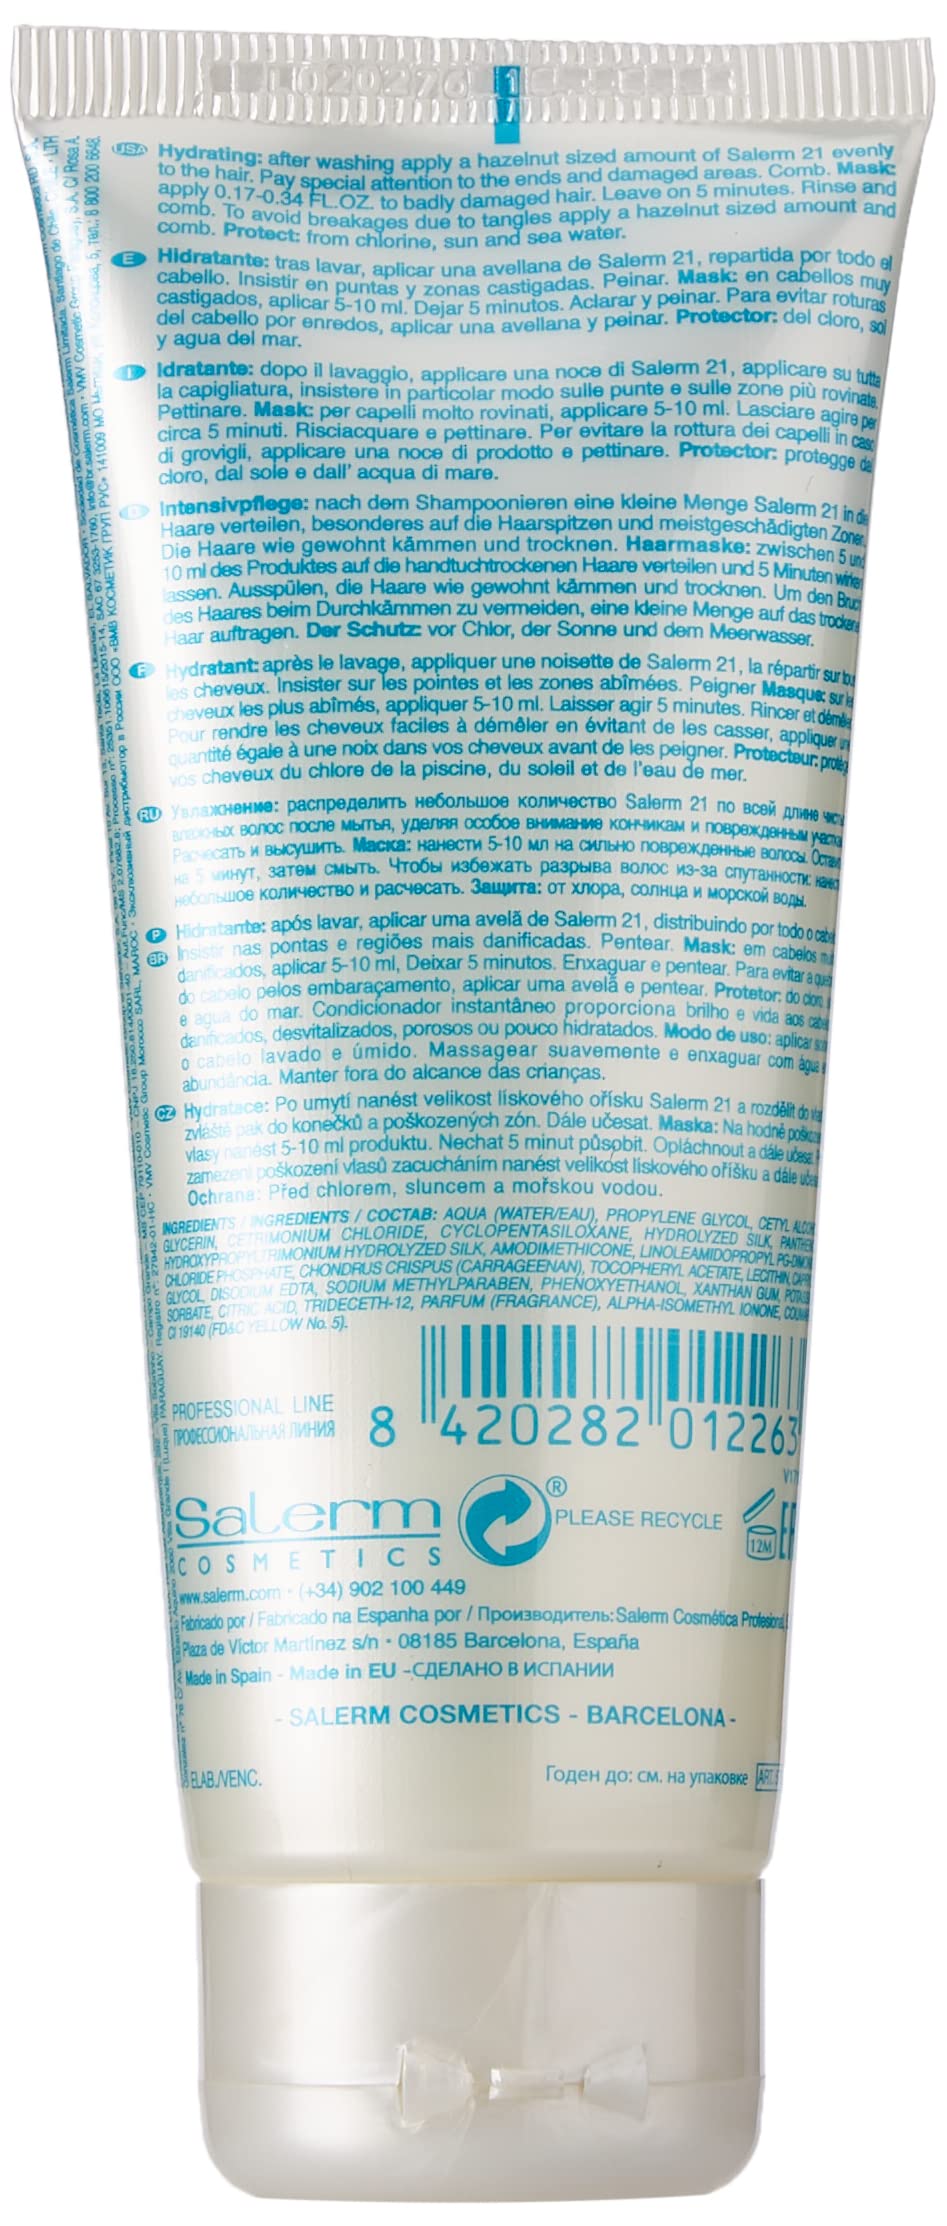 Salerm 21 Leave in Conditioner with B5 3.4oz.